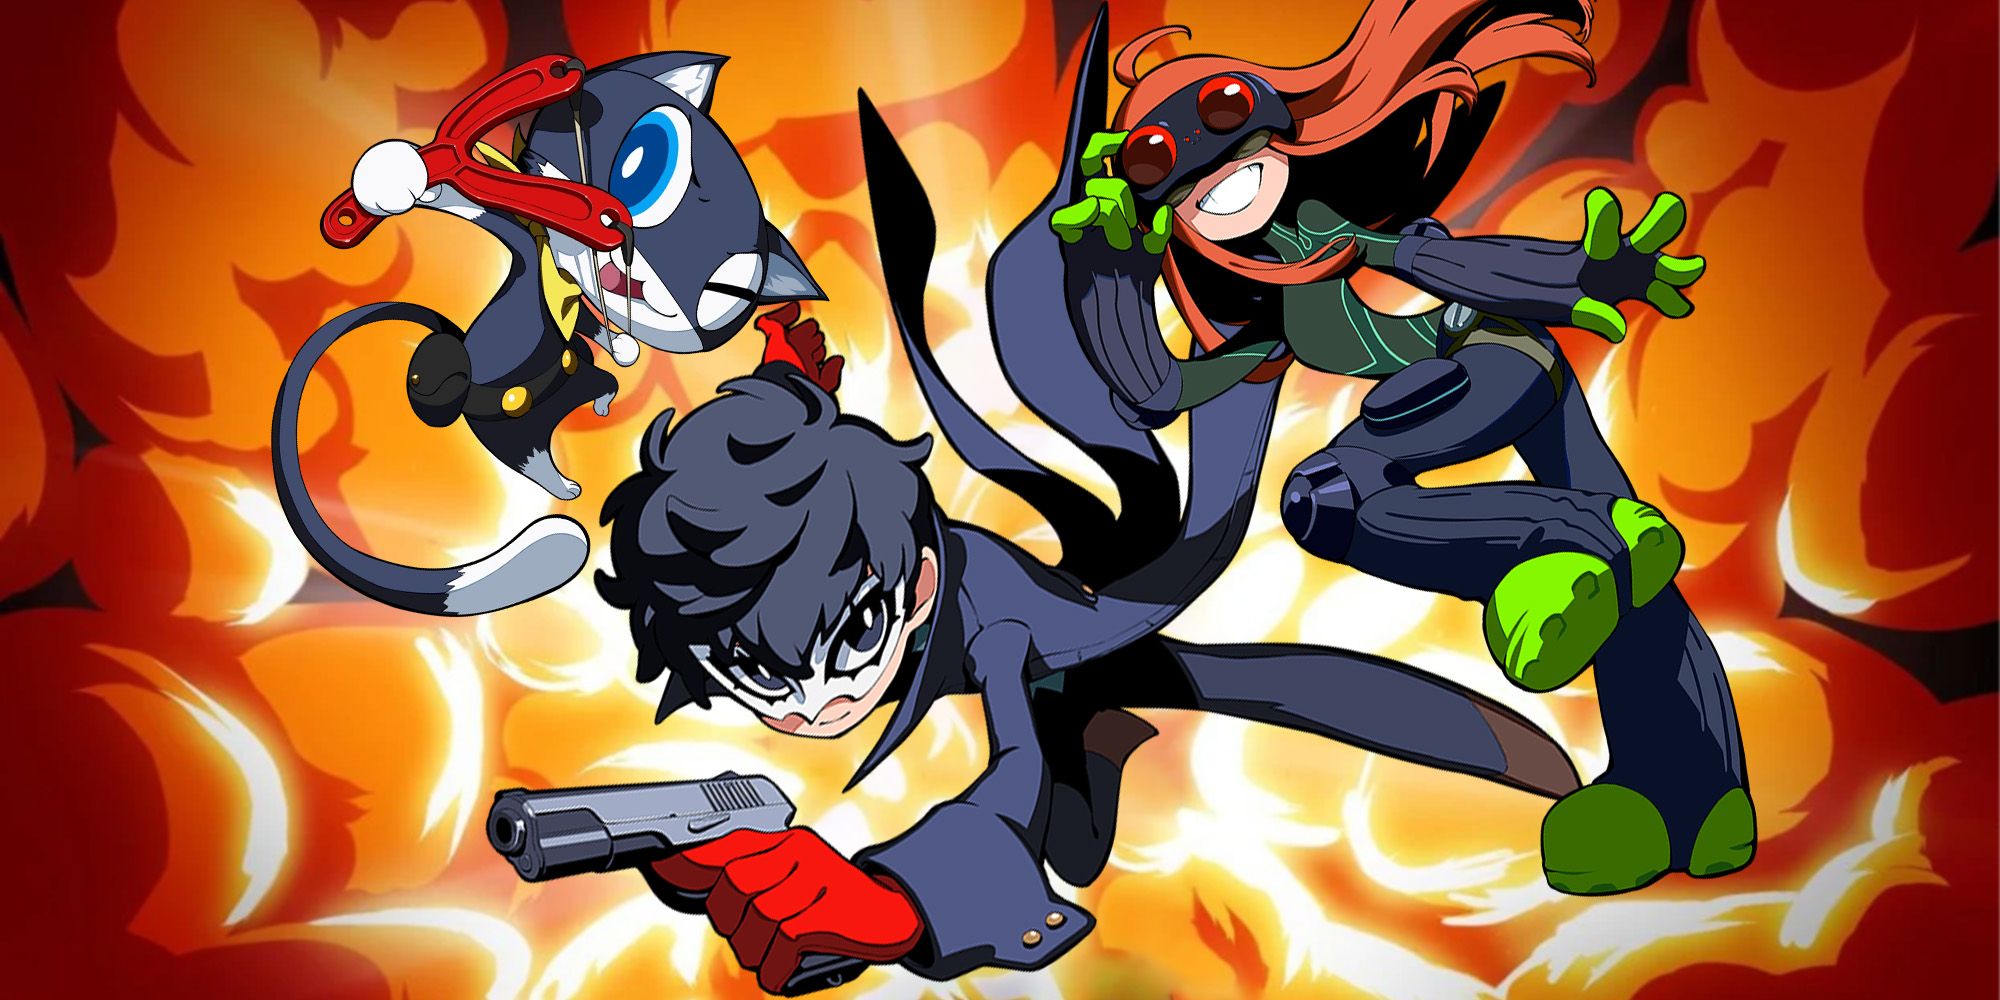 Persona 5 Royal: Every Party Member, Ranked